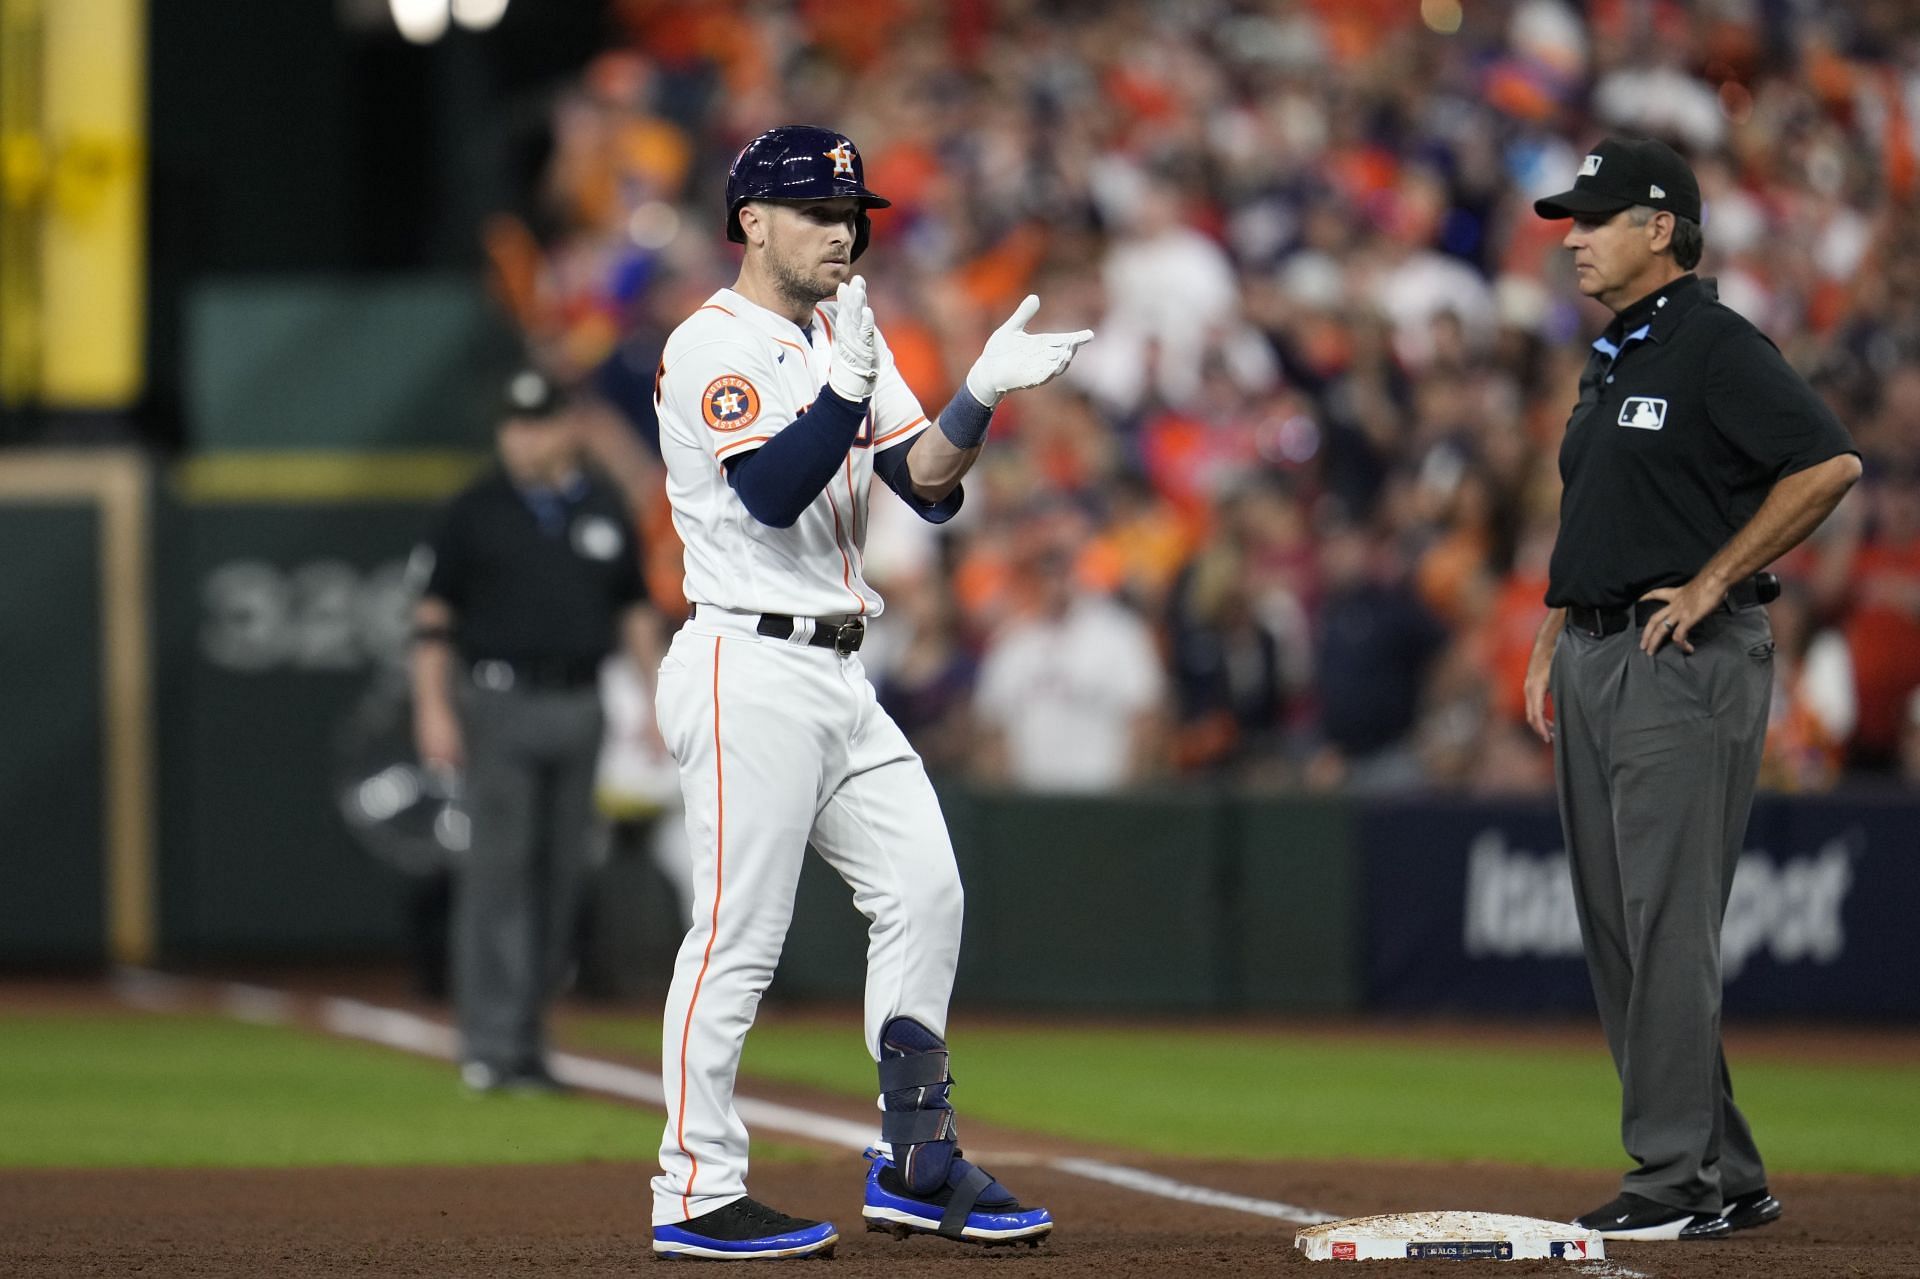 Alex Bregman reacts after his single during Game 1 of the AL Championship Series against the Texas Rangers